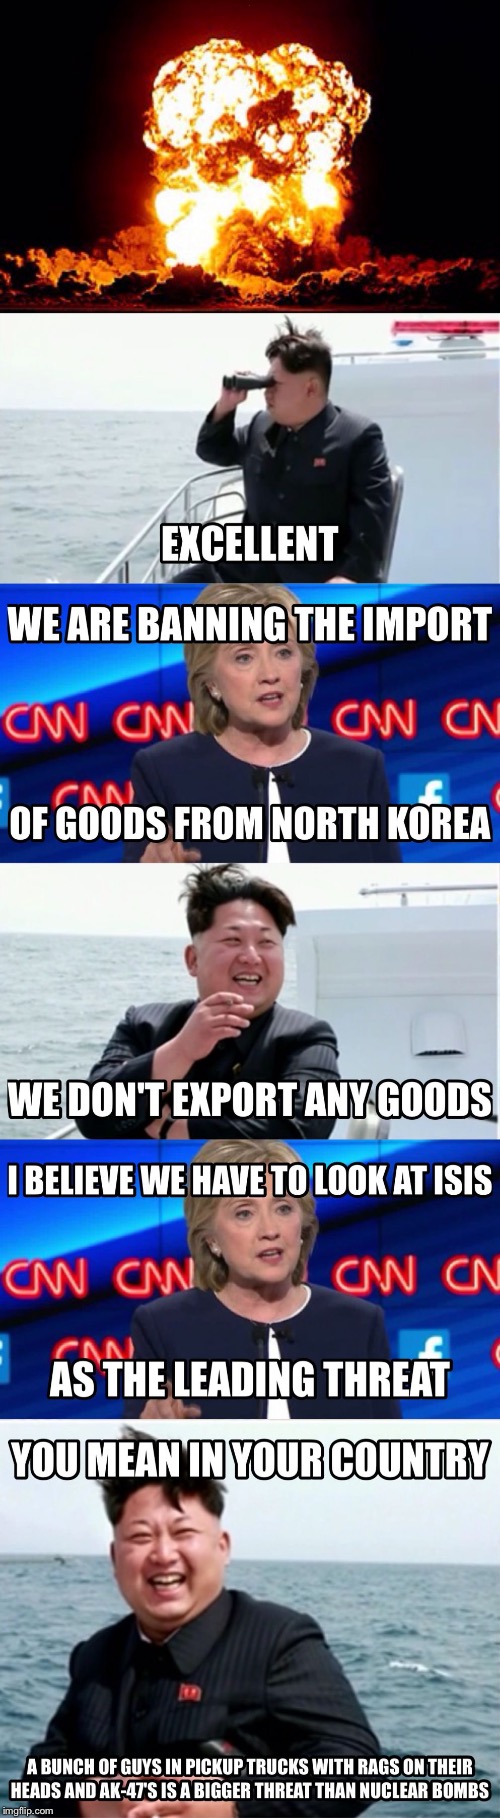 Tell Me More About You're Qualified to Have Nuclear Bombs, Lady. | . | image tagged in hillary,political meme,north korea,memes,nuclear bomb,kim jong un | made w/ Imgflip meme maker